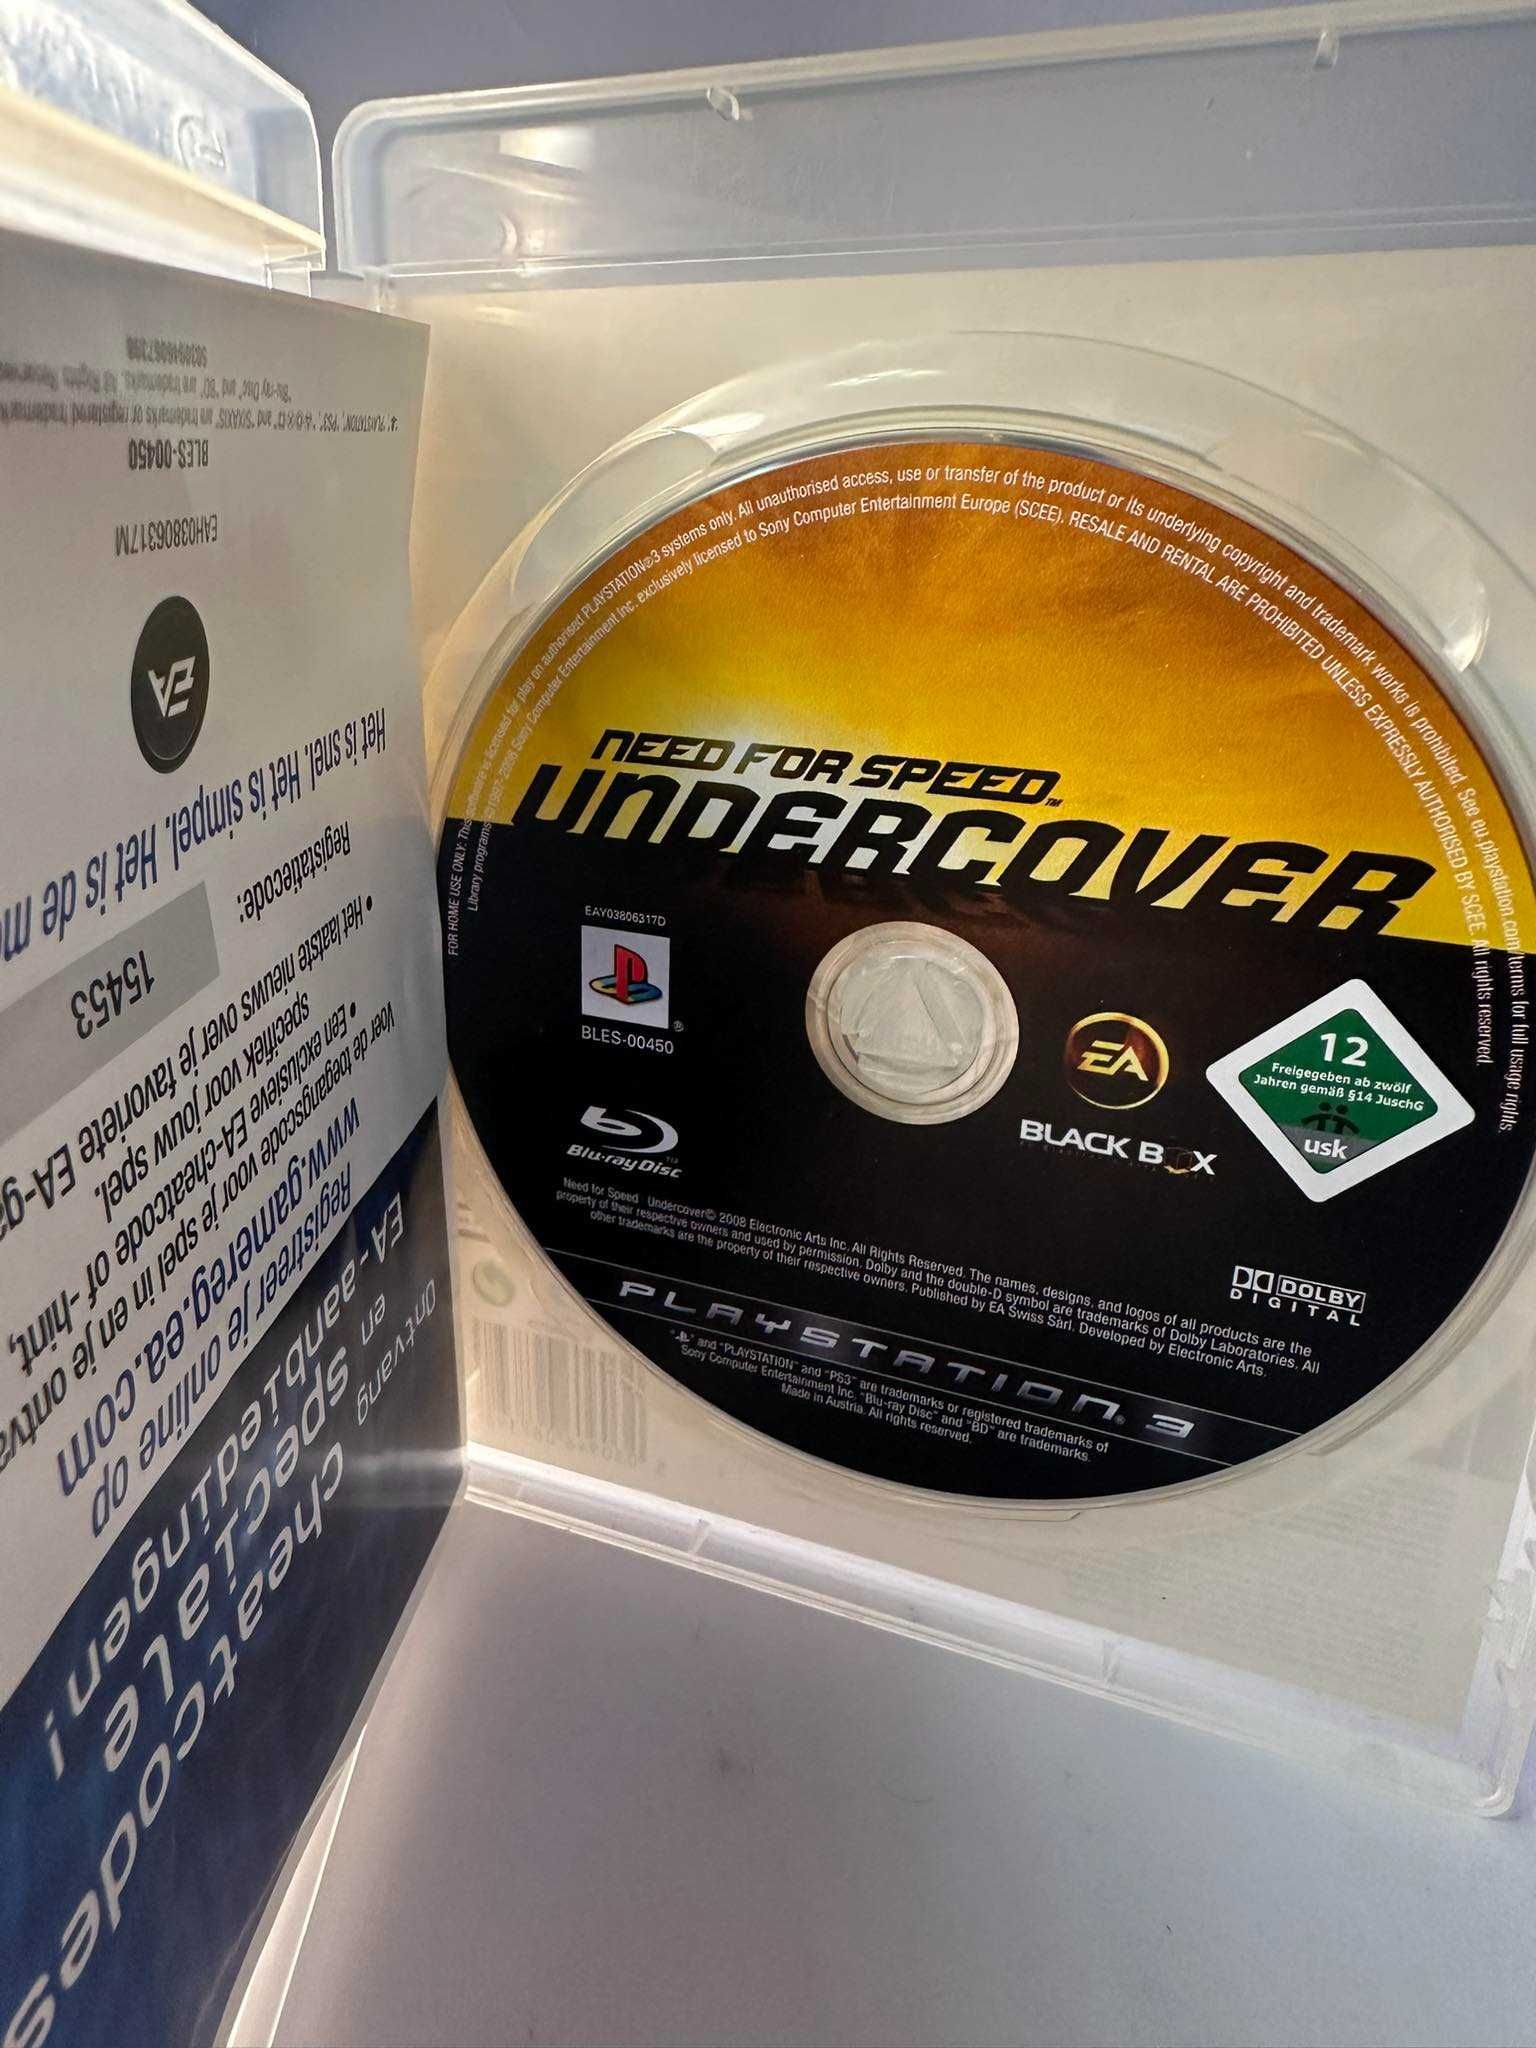 ps 3 need for speed undercover (448/24) tyl